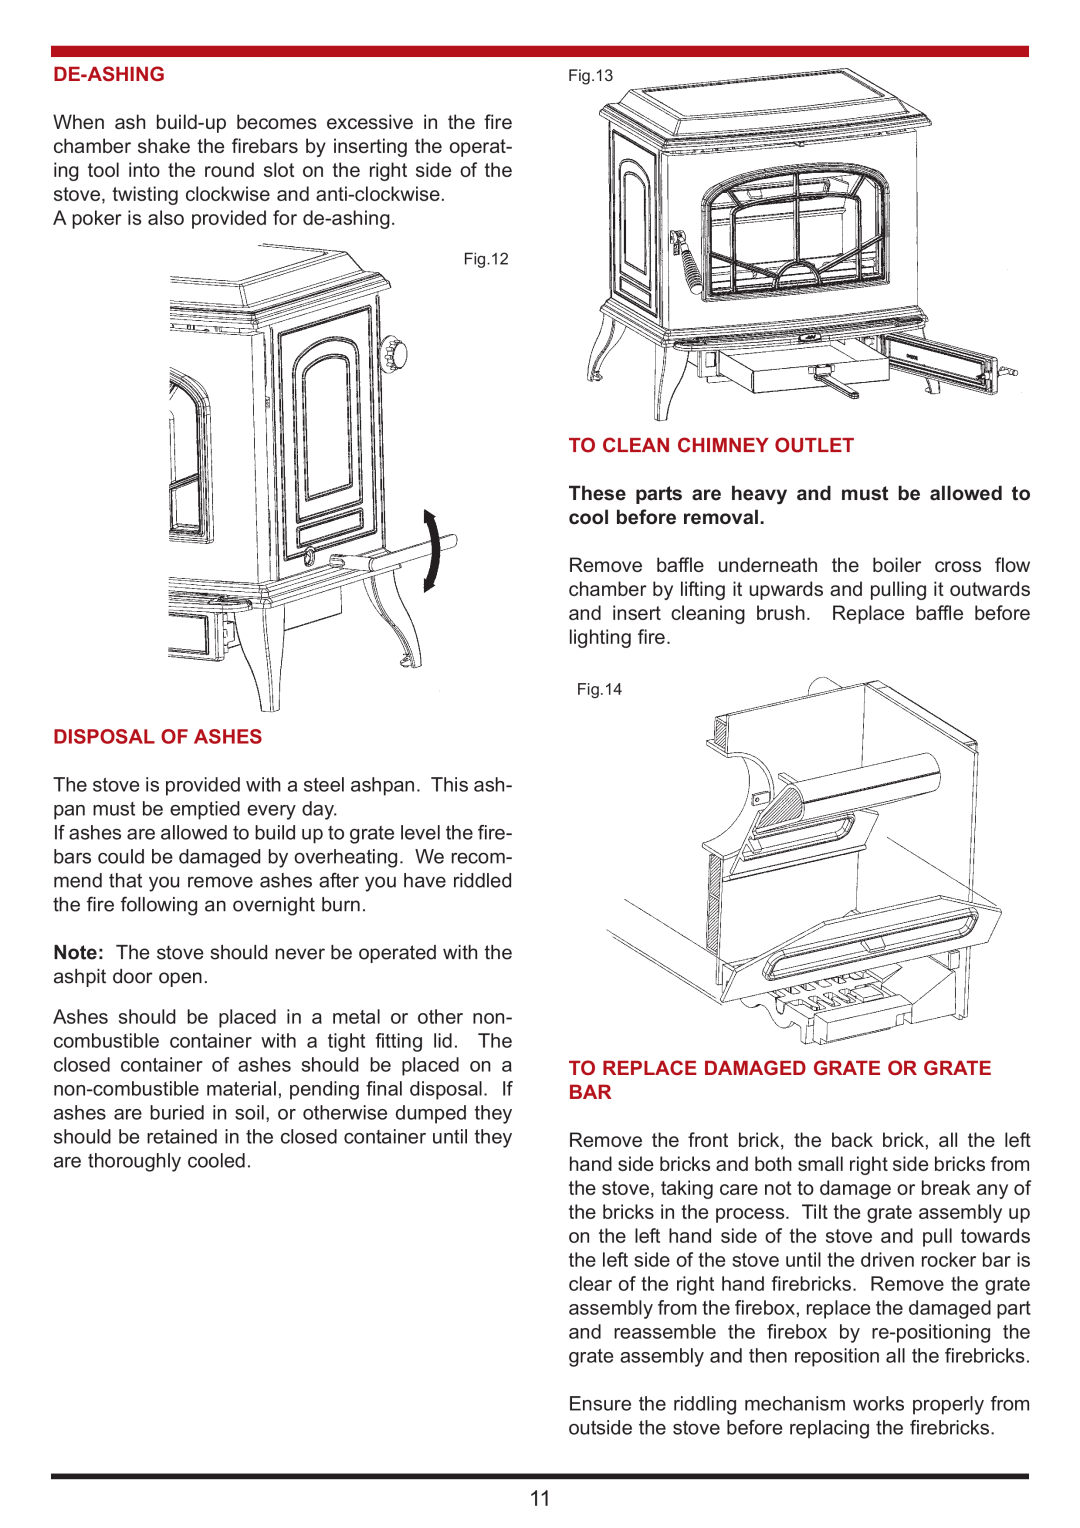 Aga Ranges Berrington manual De-Ashing, Disposal Of Ashes, To Clean Chimney Outlet, To Replace Damaged Grate Or Grate Bar 